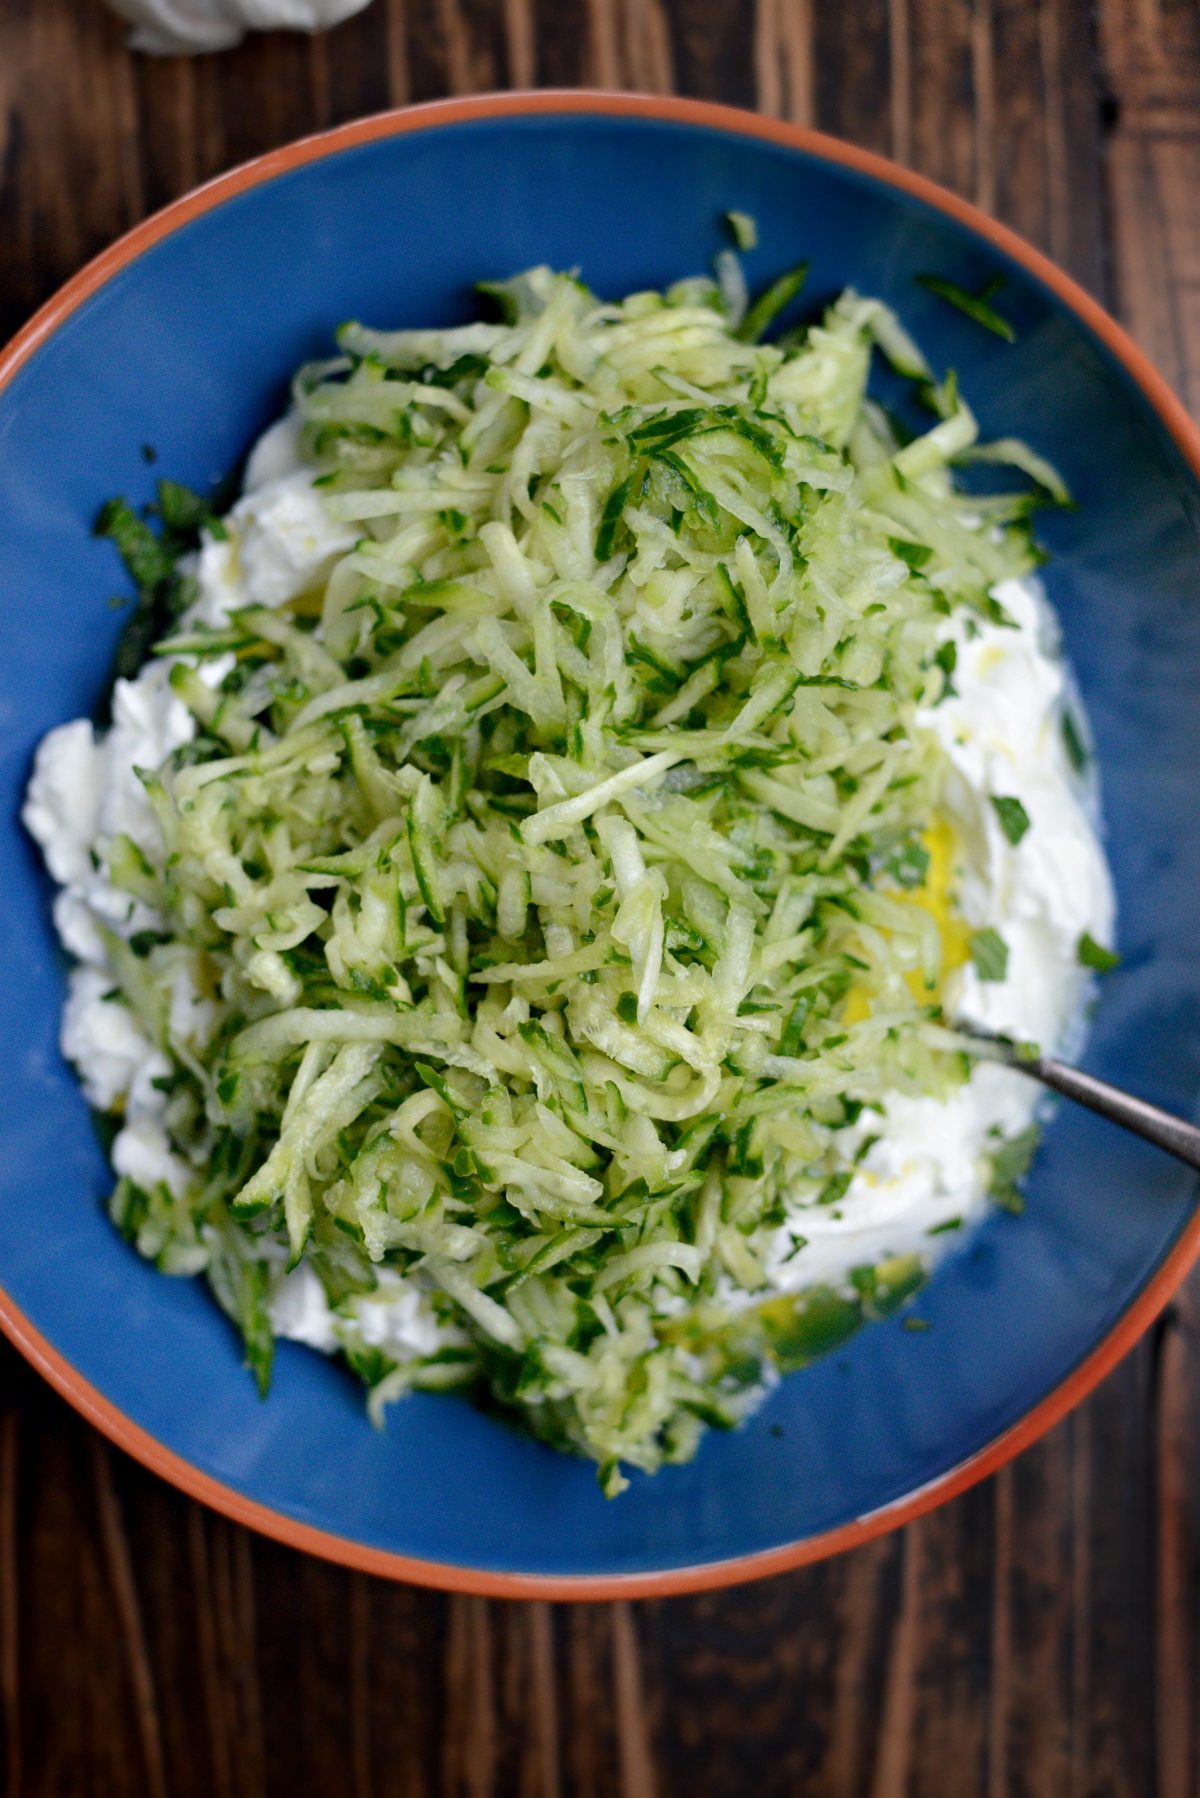 Add grated fresh garlic and shredded and drained cucumber